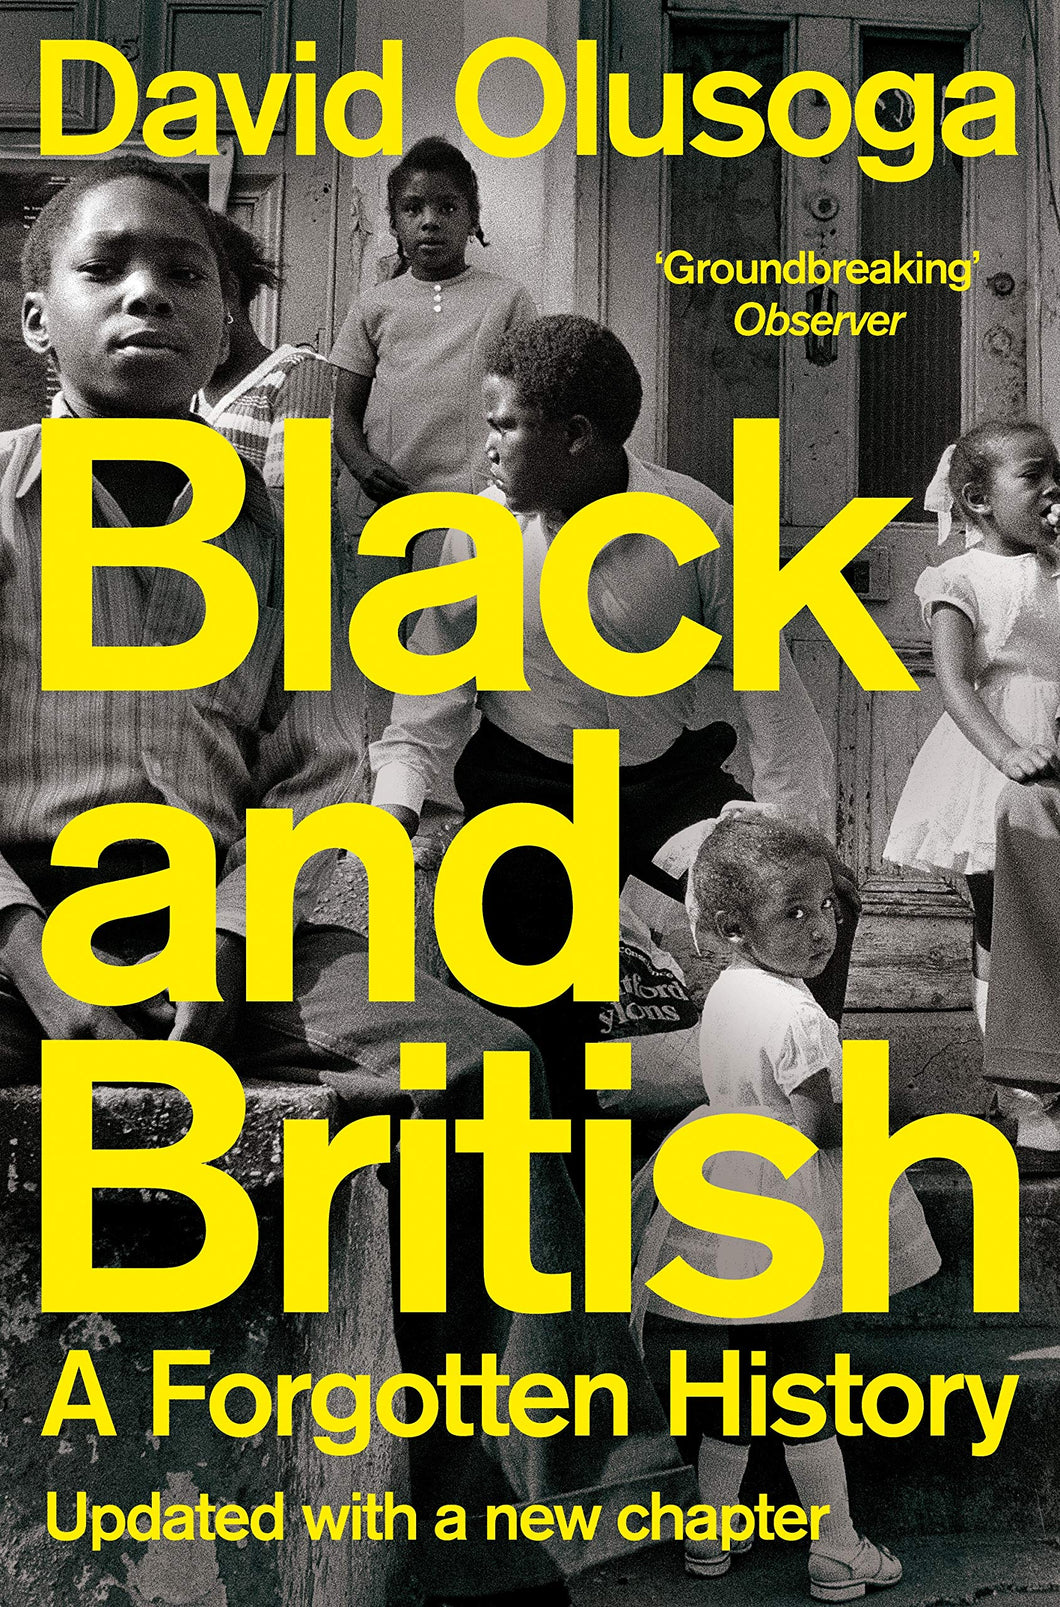 The book cover shows a black and white image of Black children outside a house. The title is in neon yellow, large letters. A quote from the Observer reads 'Groundbreaking'. Along the bottom, also in yellow text, reads 